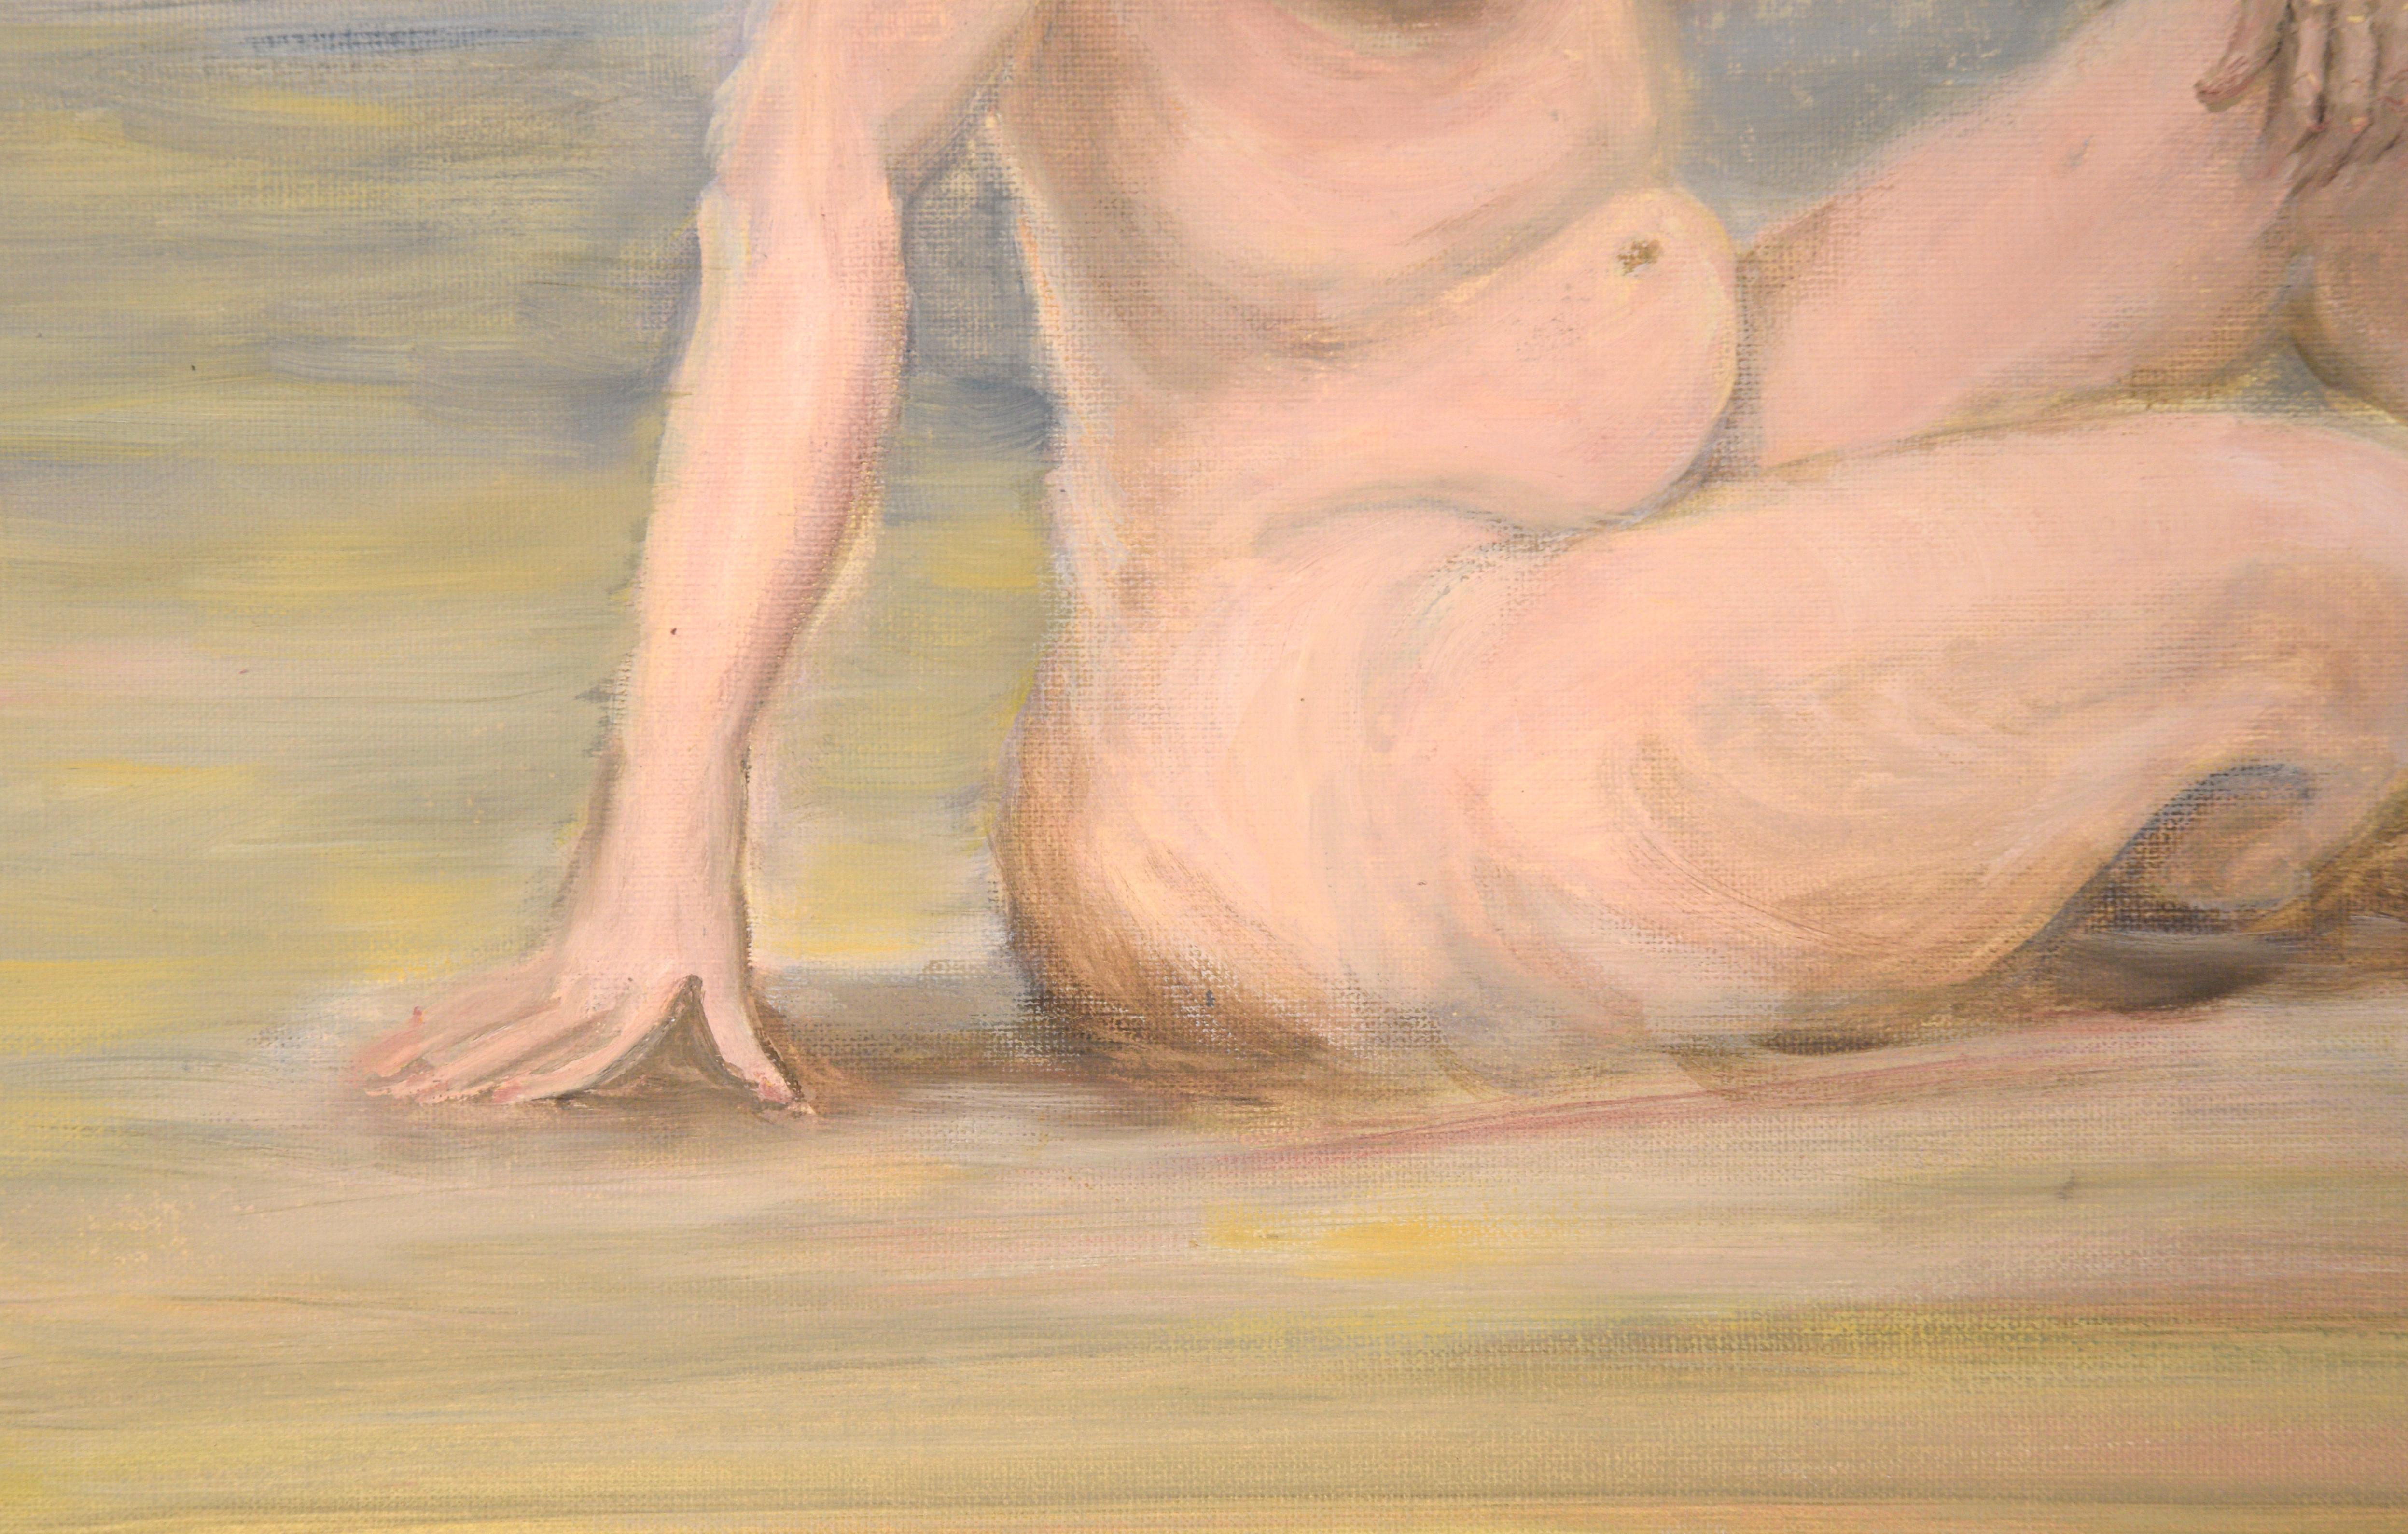 Woman at the Lake, Mid Century Bay Area Nude Figure Study  - American Impressionist Painting by Genevieve Rogers